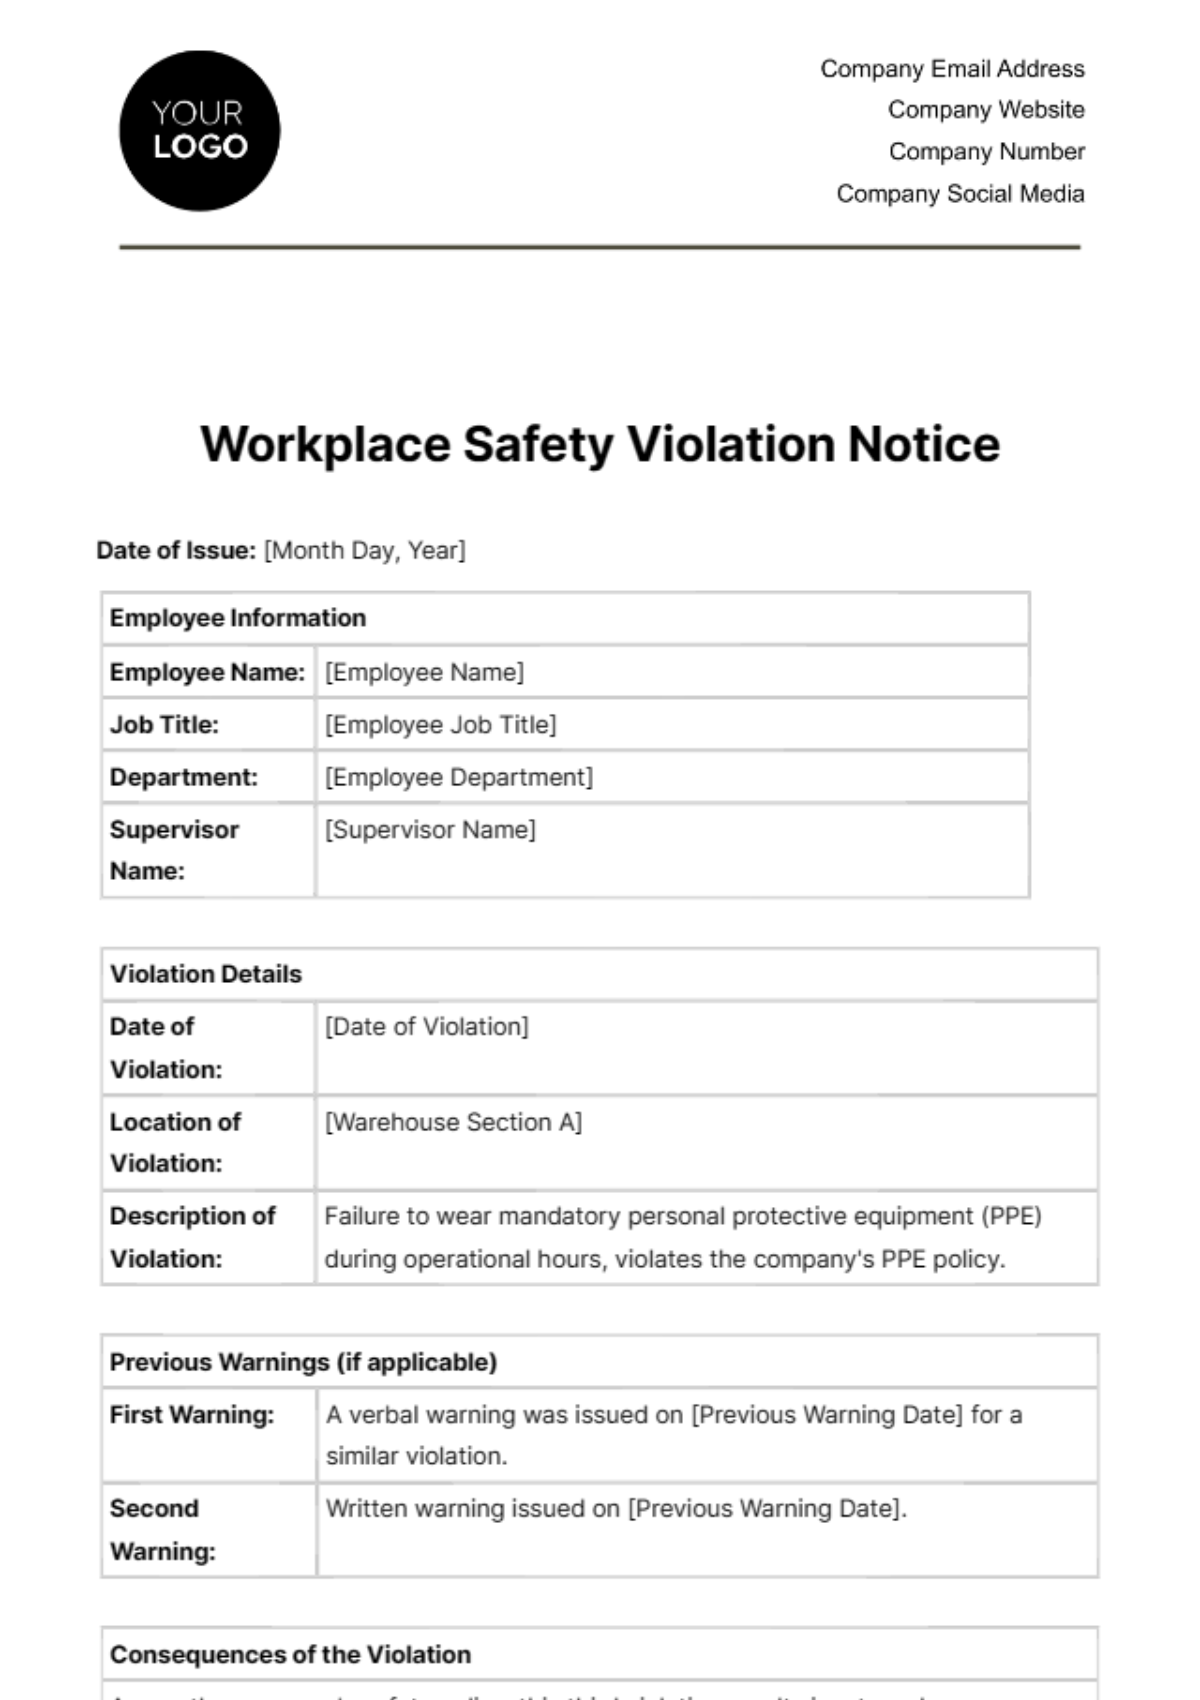 Workplace Safety Violation Notice Template